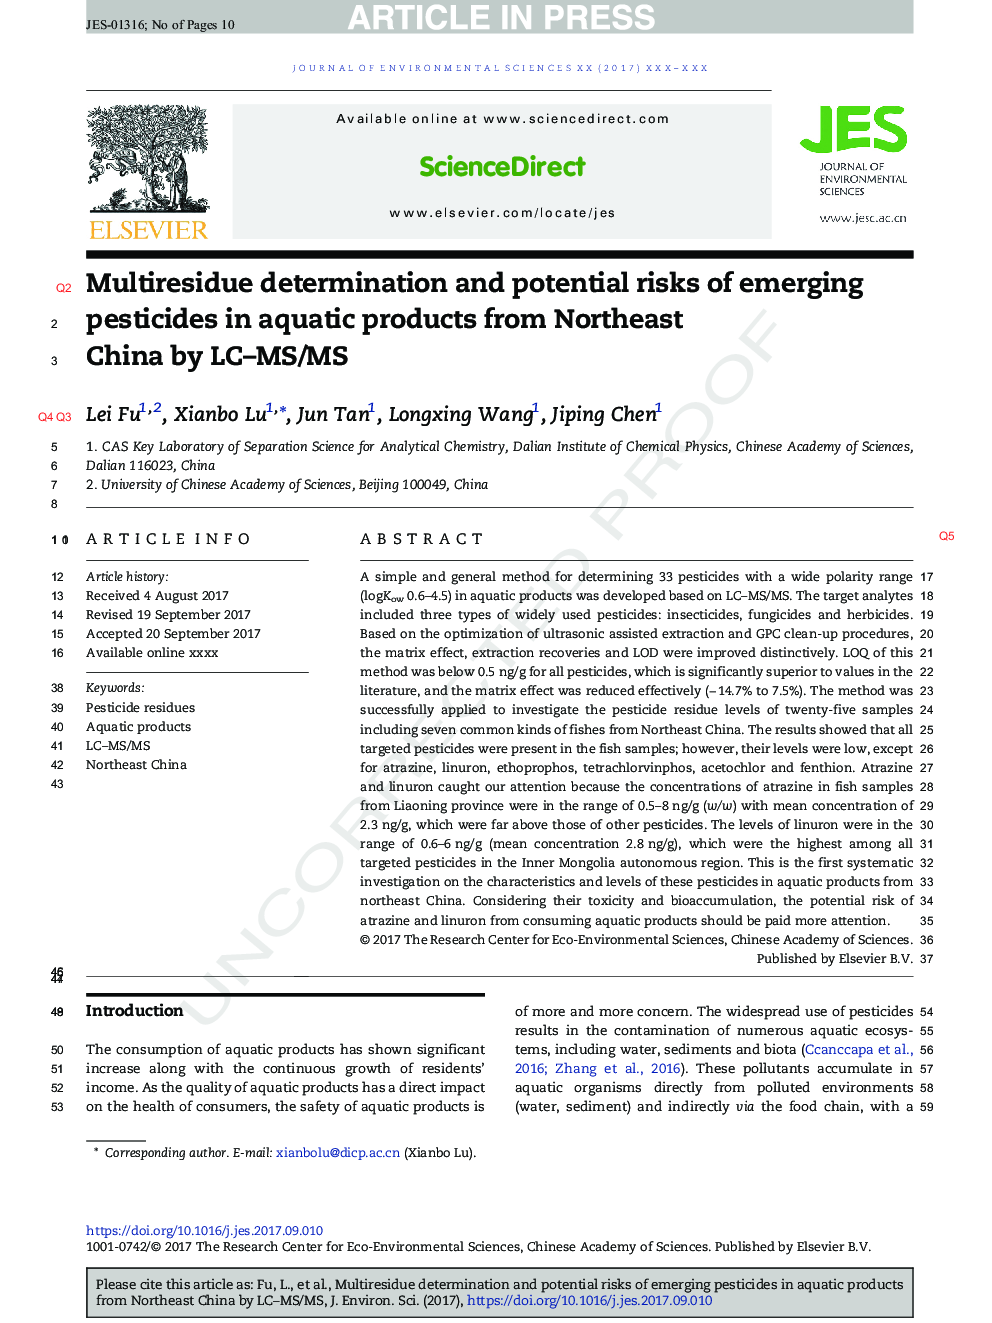 Multiresidue determination and potential risks of emerging pesticides in aquatic products from Northeast China by LC-MS/MS